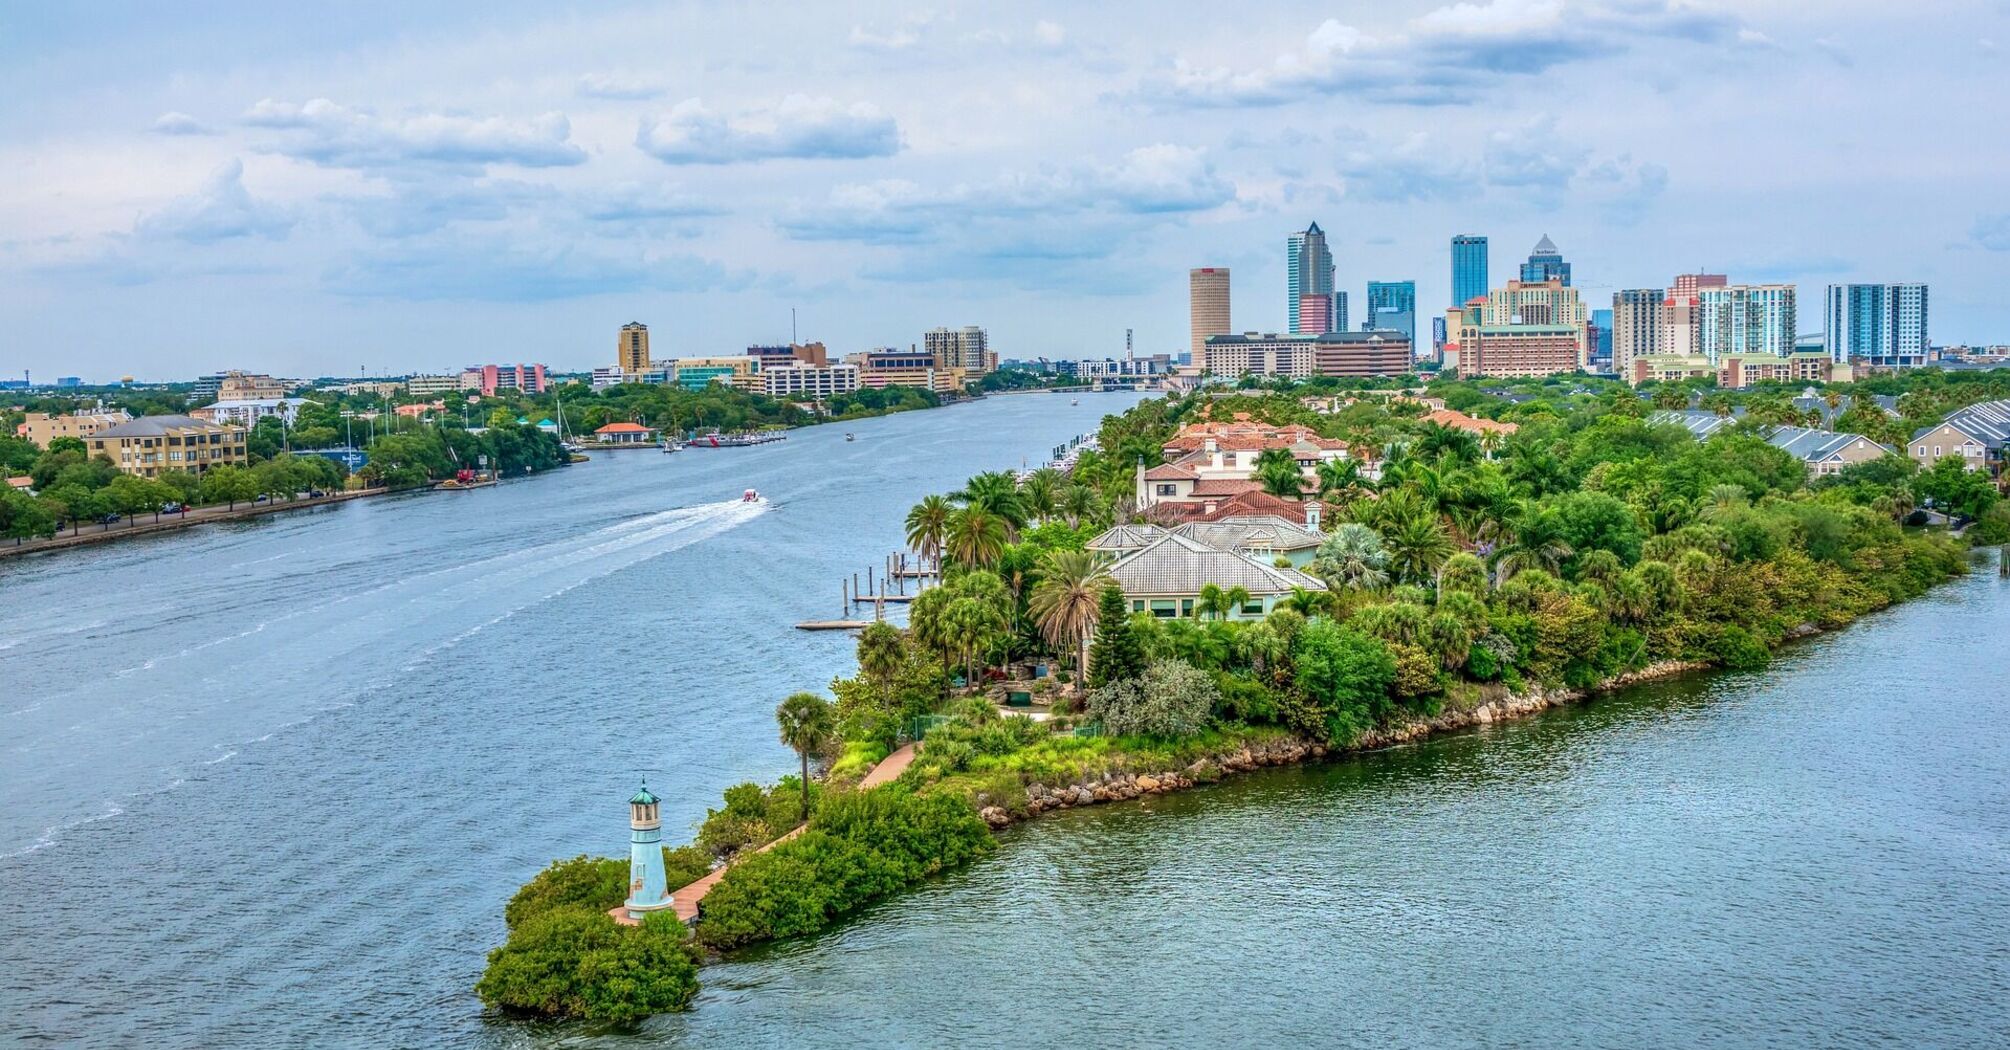 Aerial view of Tampa with riverfront, lush greenery, and city skyline